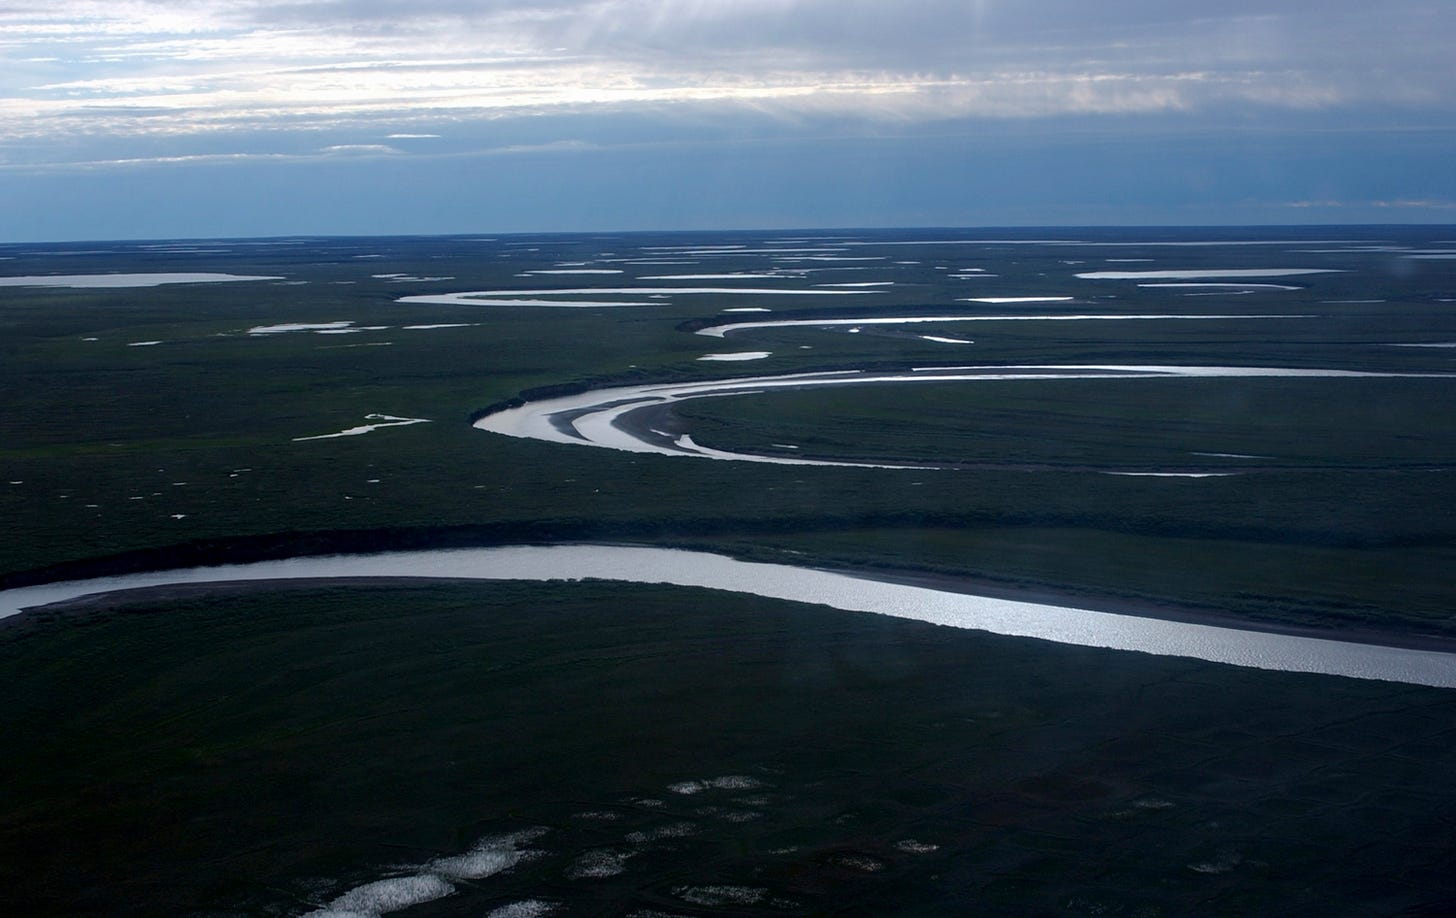 This 2004 photo provided by the United States Geological Survey shows Fish Creek through the National Petroleum Reserve-Alaska, managed by the Bureau of Land Management on Alaska's North Slope.